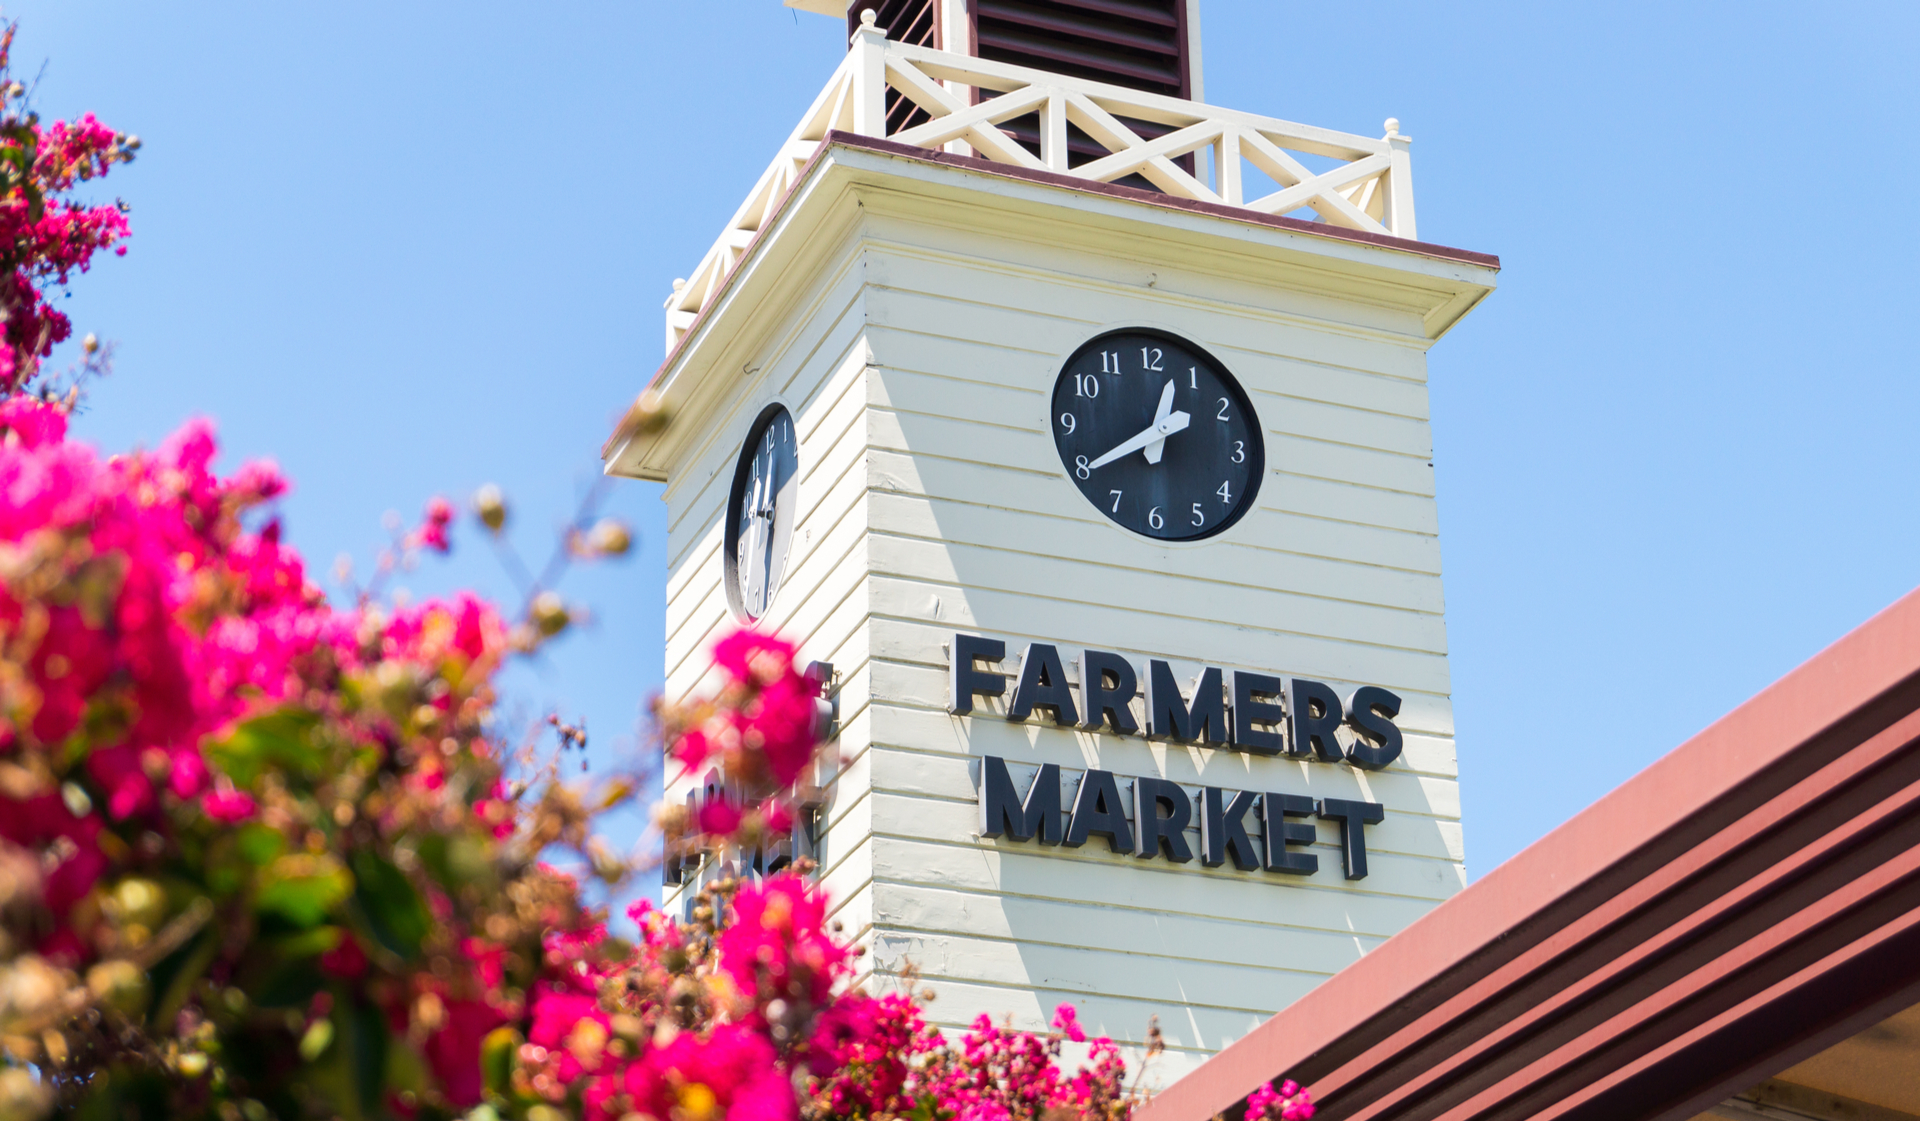 Villas at Park La Brea | Los Angeles, CA | Farmers Market clock tower .<p>&nbsp;</p>
<p style="text-align: center;">Pick up fresh fruits and artisan foods at The Original Famers Market, just a 5-minute drive from home.&nbsp;</p>
